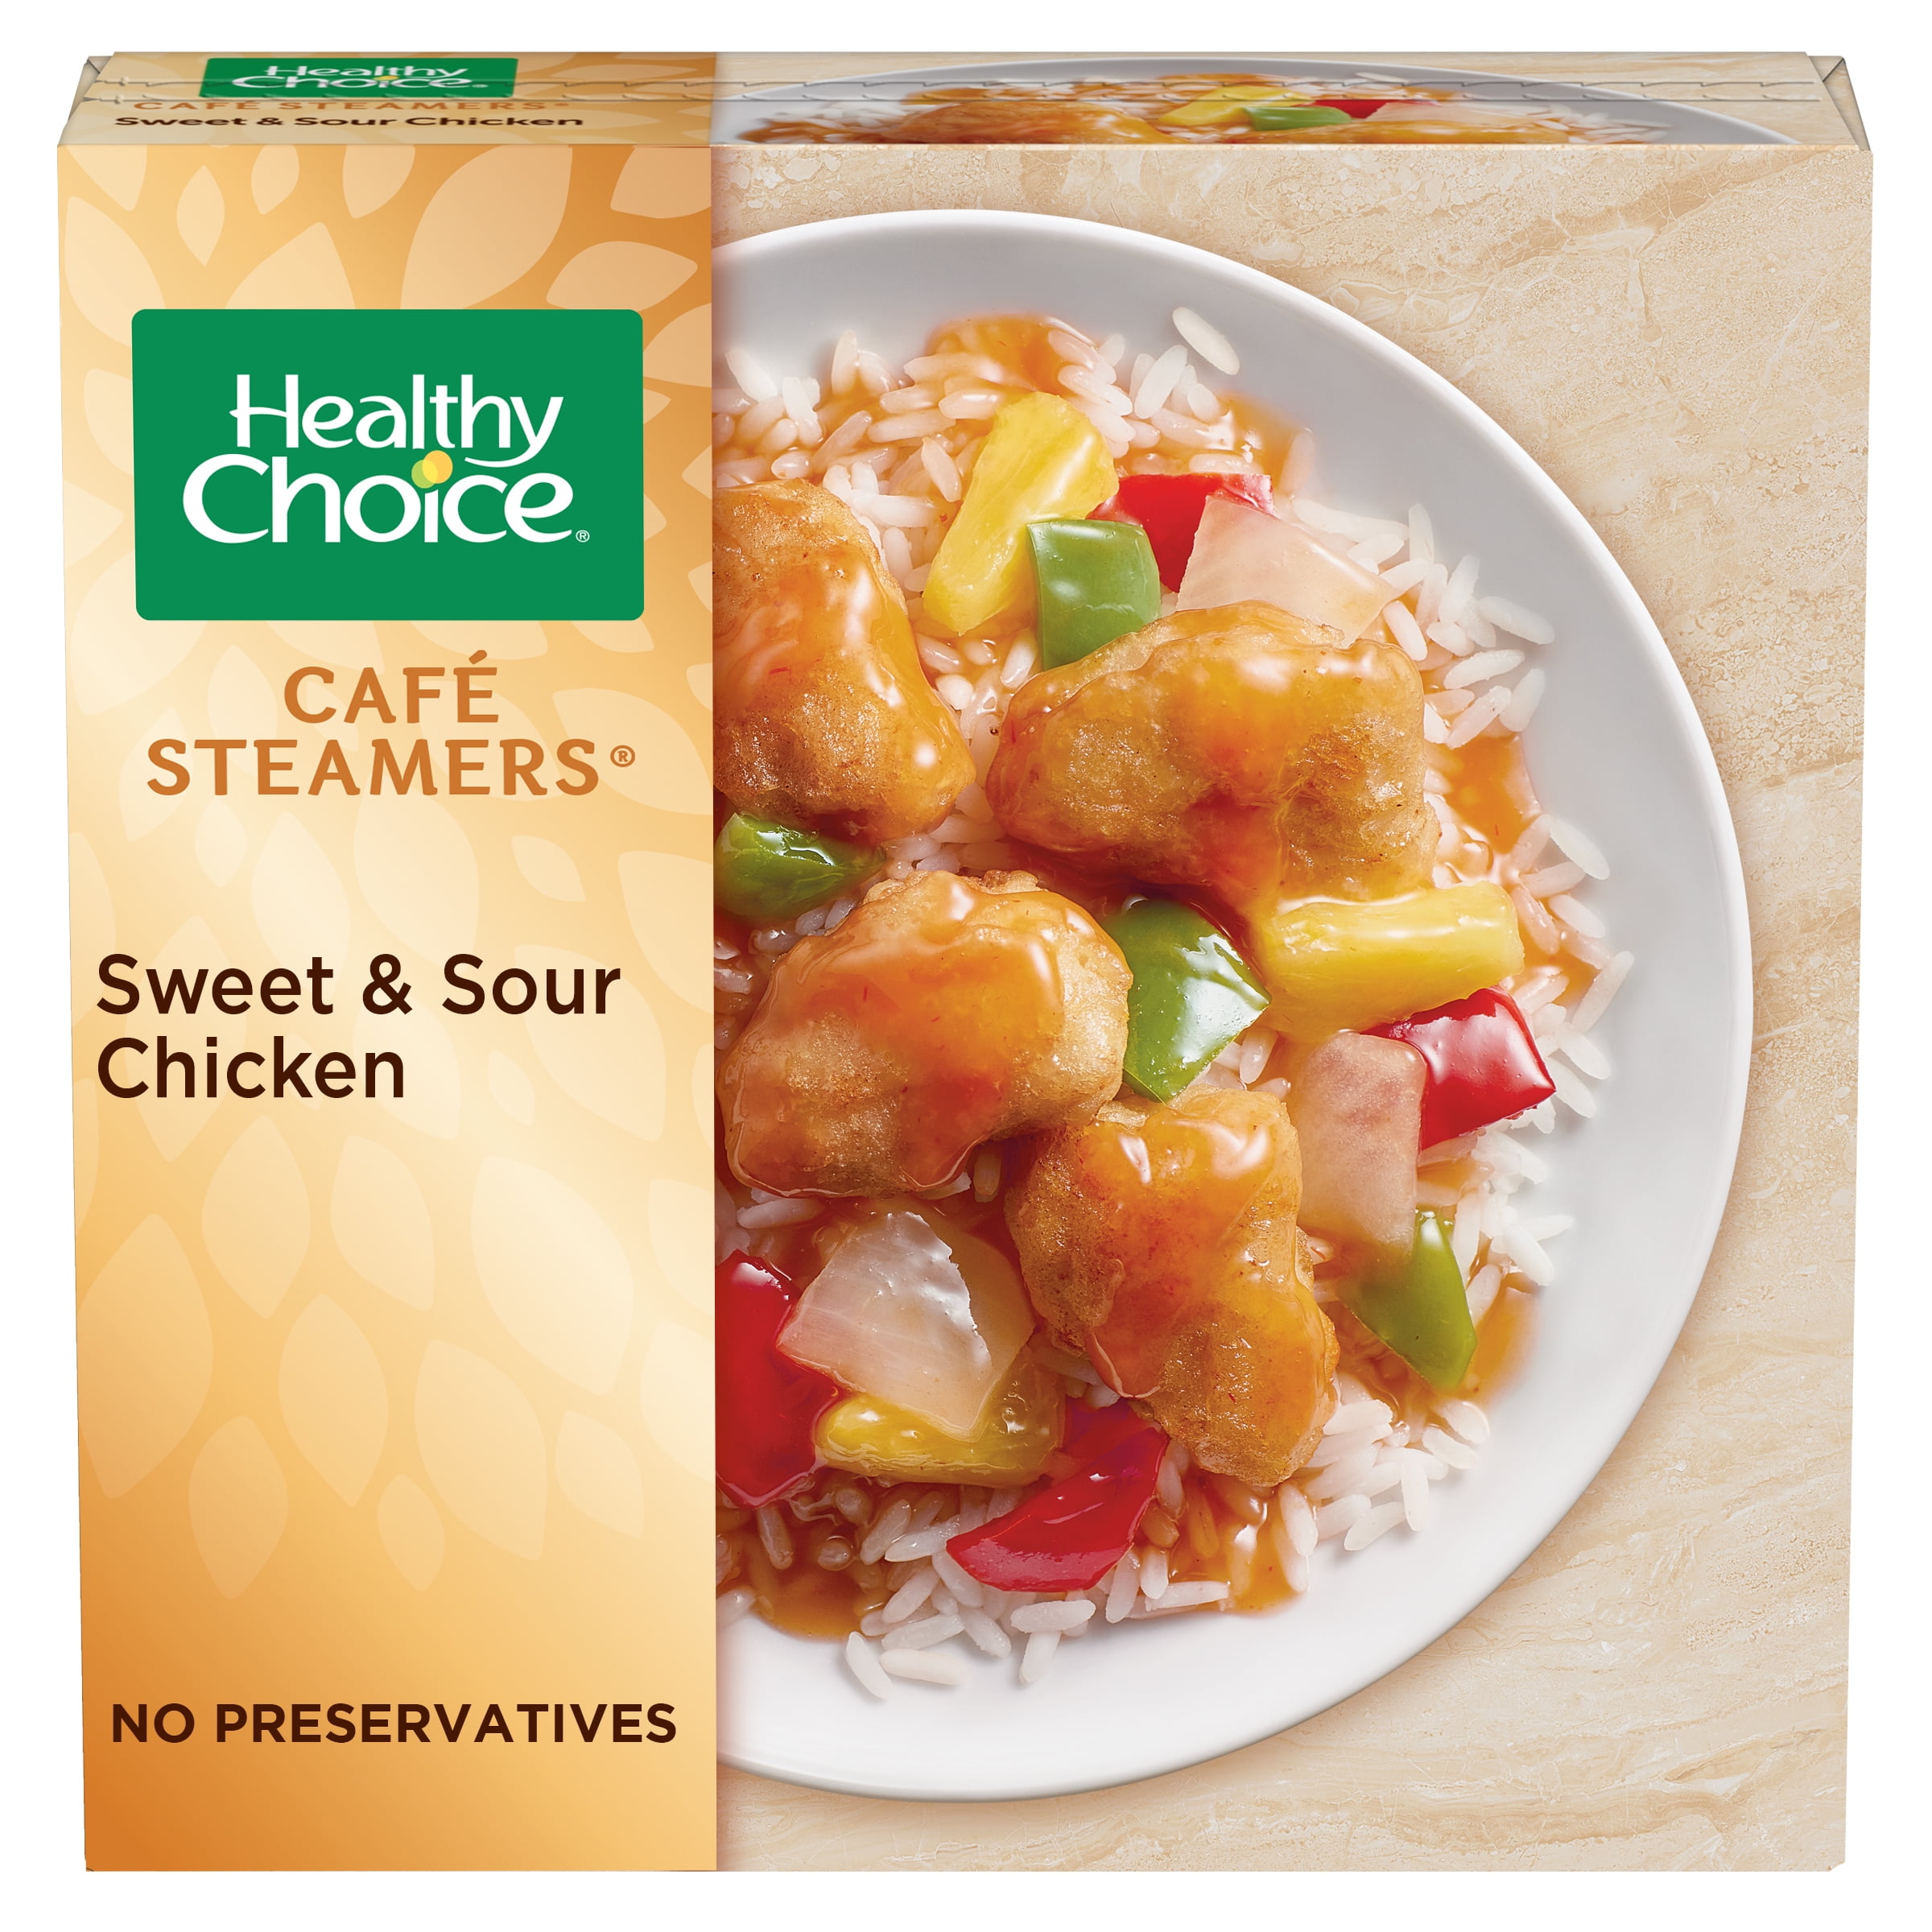 Healthy Choice Caf Steamers Sweet & Sour Chicken Frozen Meal, 10 oz (Frozen)